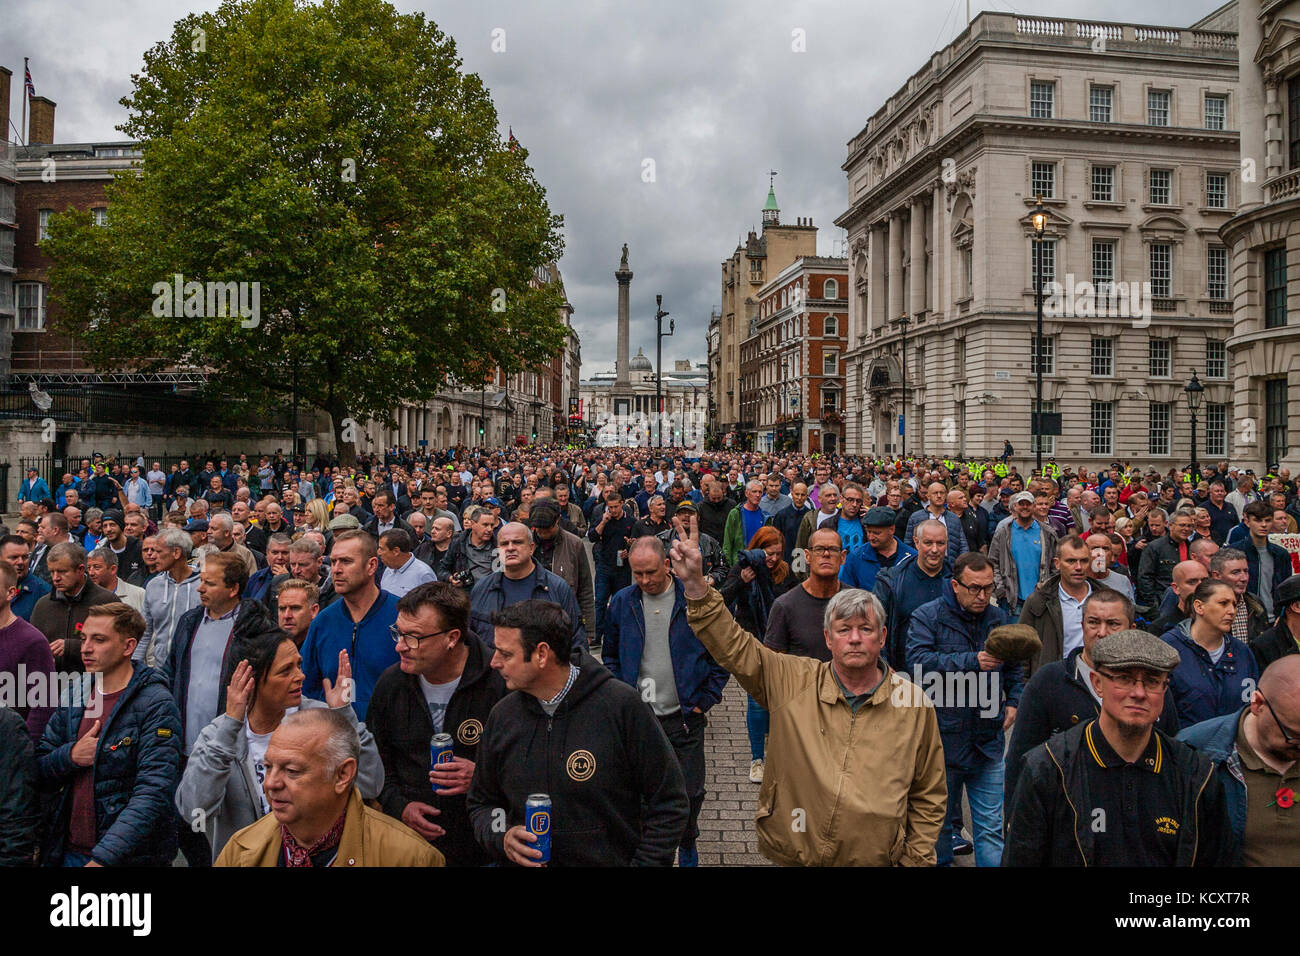 London, UK. 7th October 2017. Football fans from across the Uk march against extremism under the banner of the FLA (football lads alliance) Credit: Grant Rooney/Alamy Live News Stock Photo